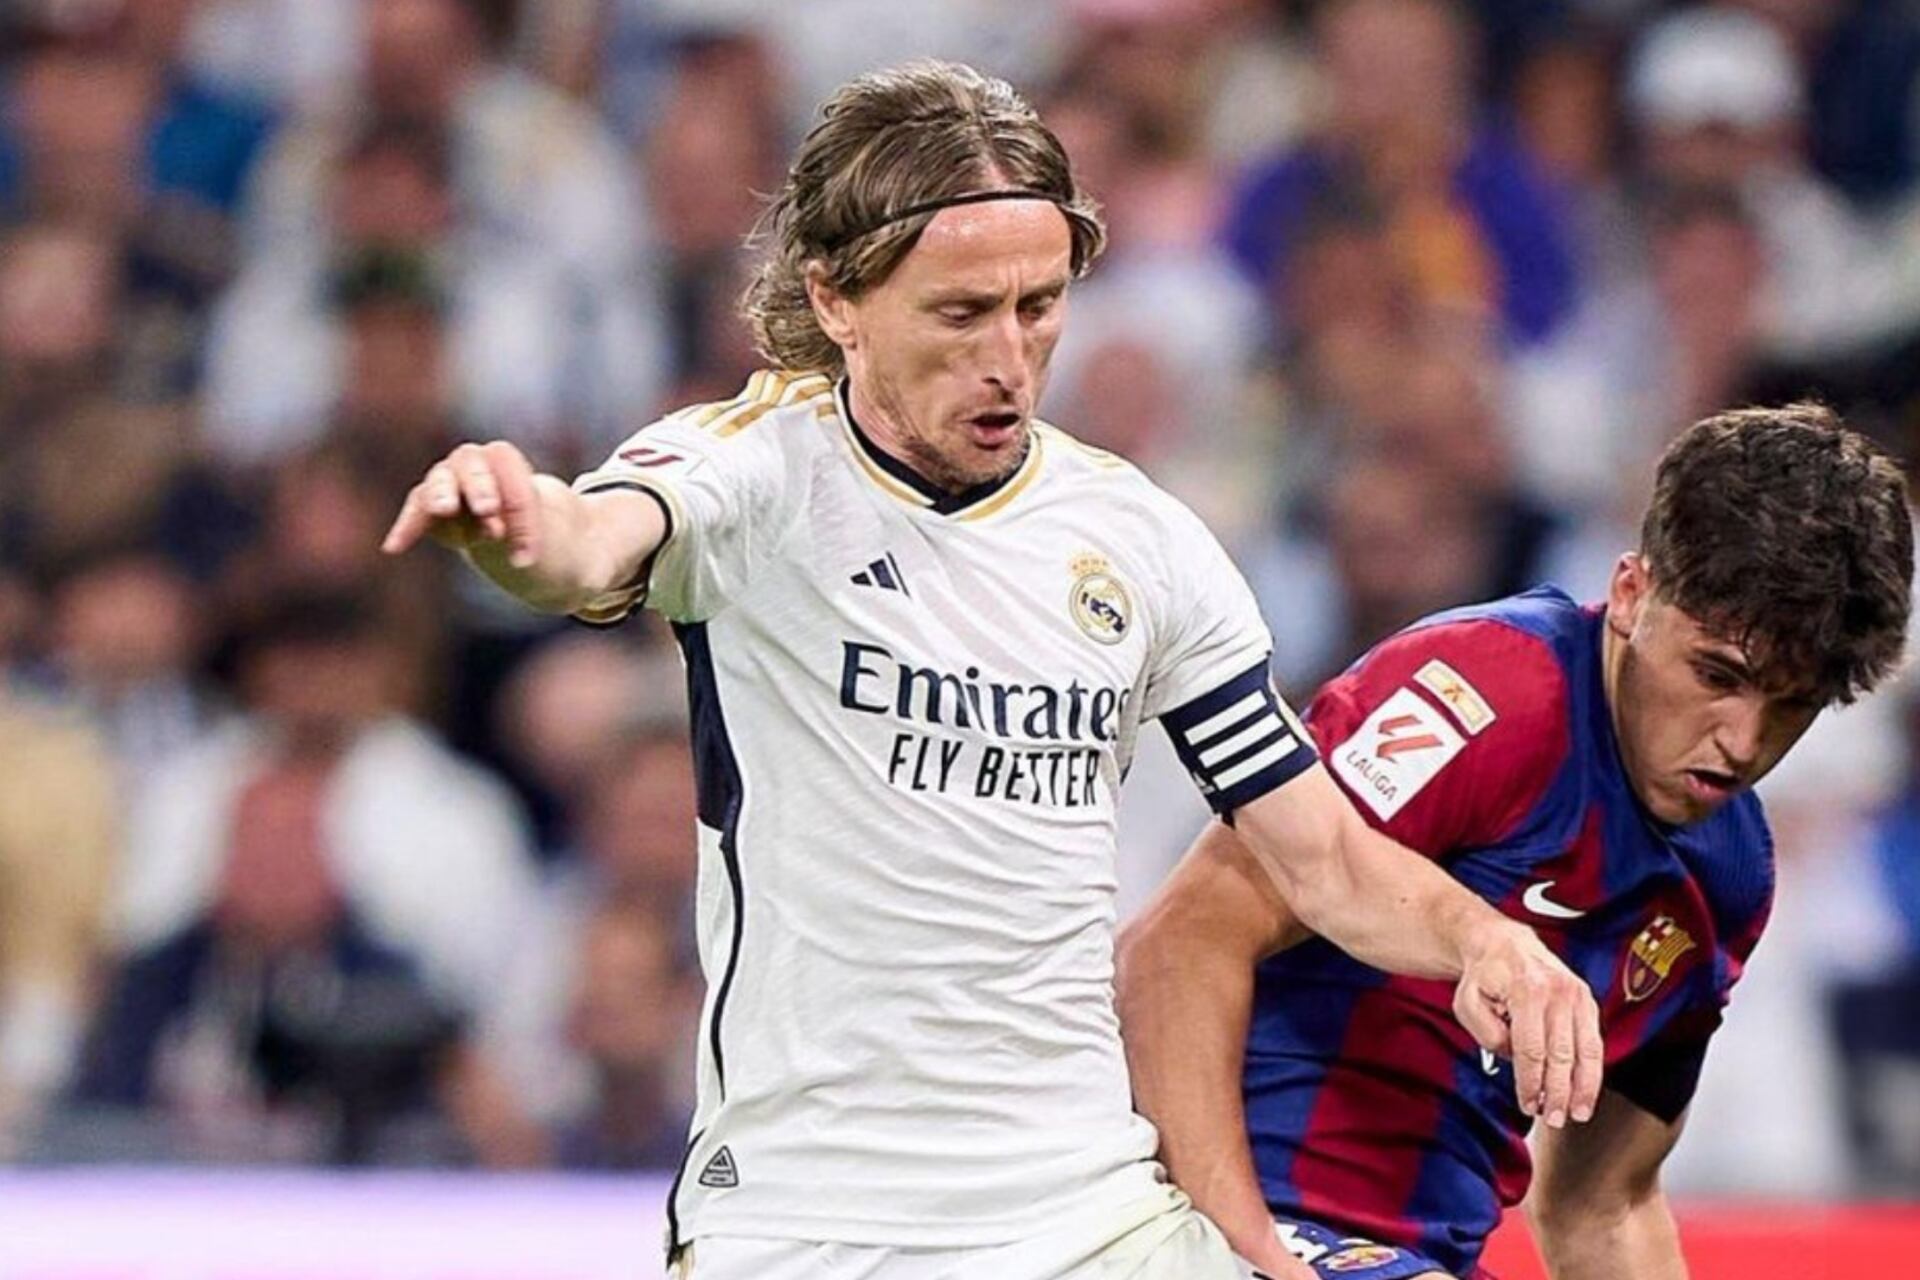 Modric probably played his last El Clasico for Real Madrid and this was his message to the fans